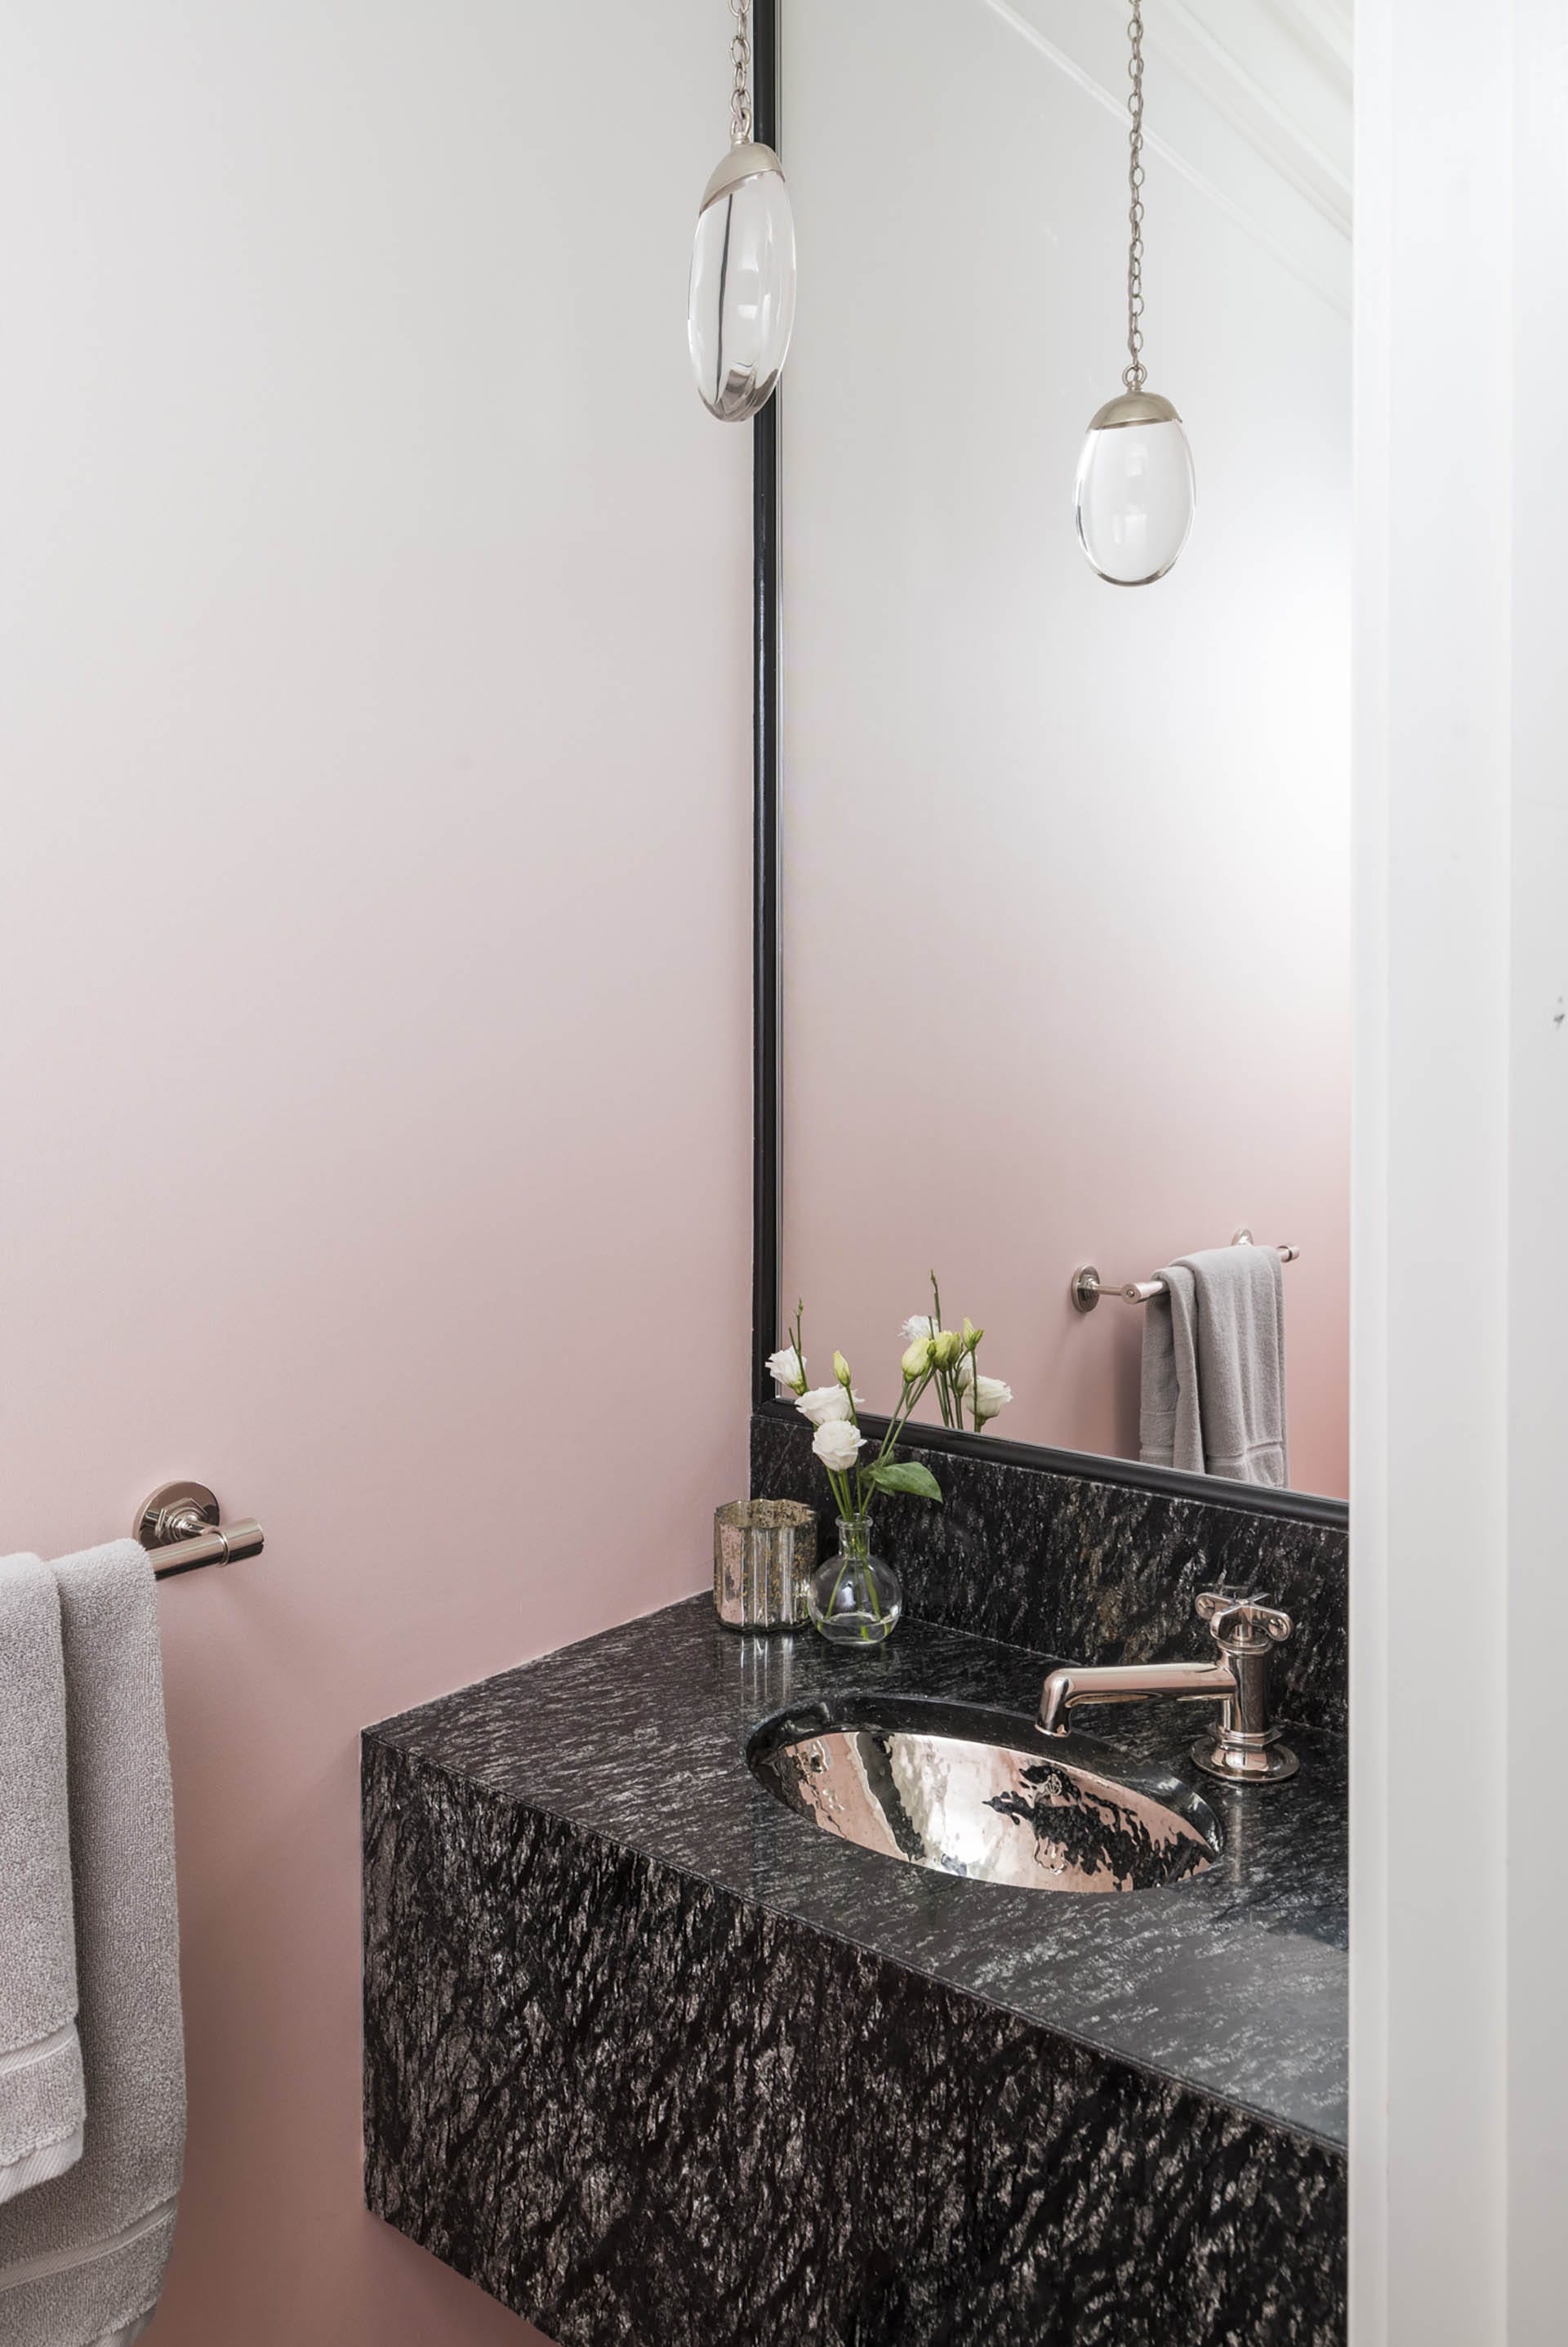 Powder room with white and pink ombre wallpaper, a dark stone vanity, and a single hanging pendant light